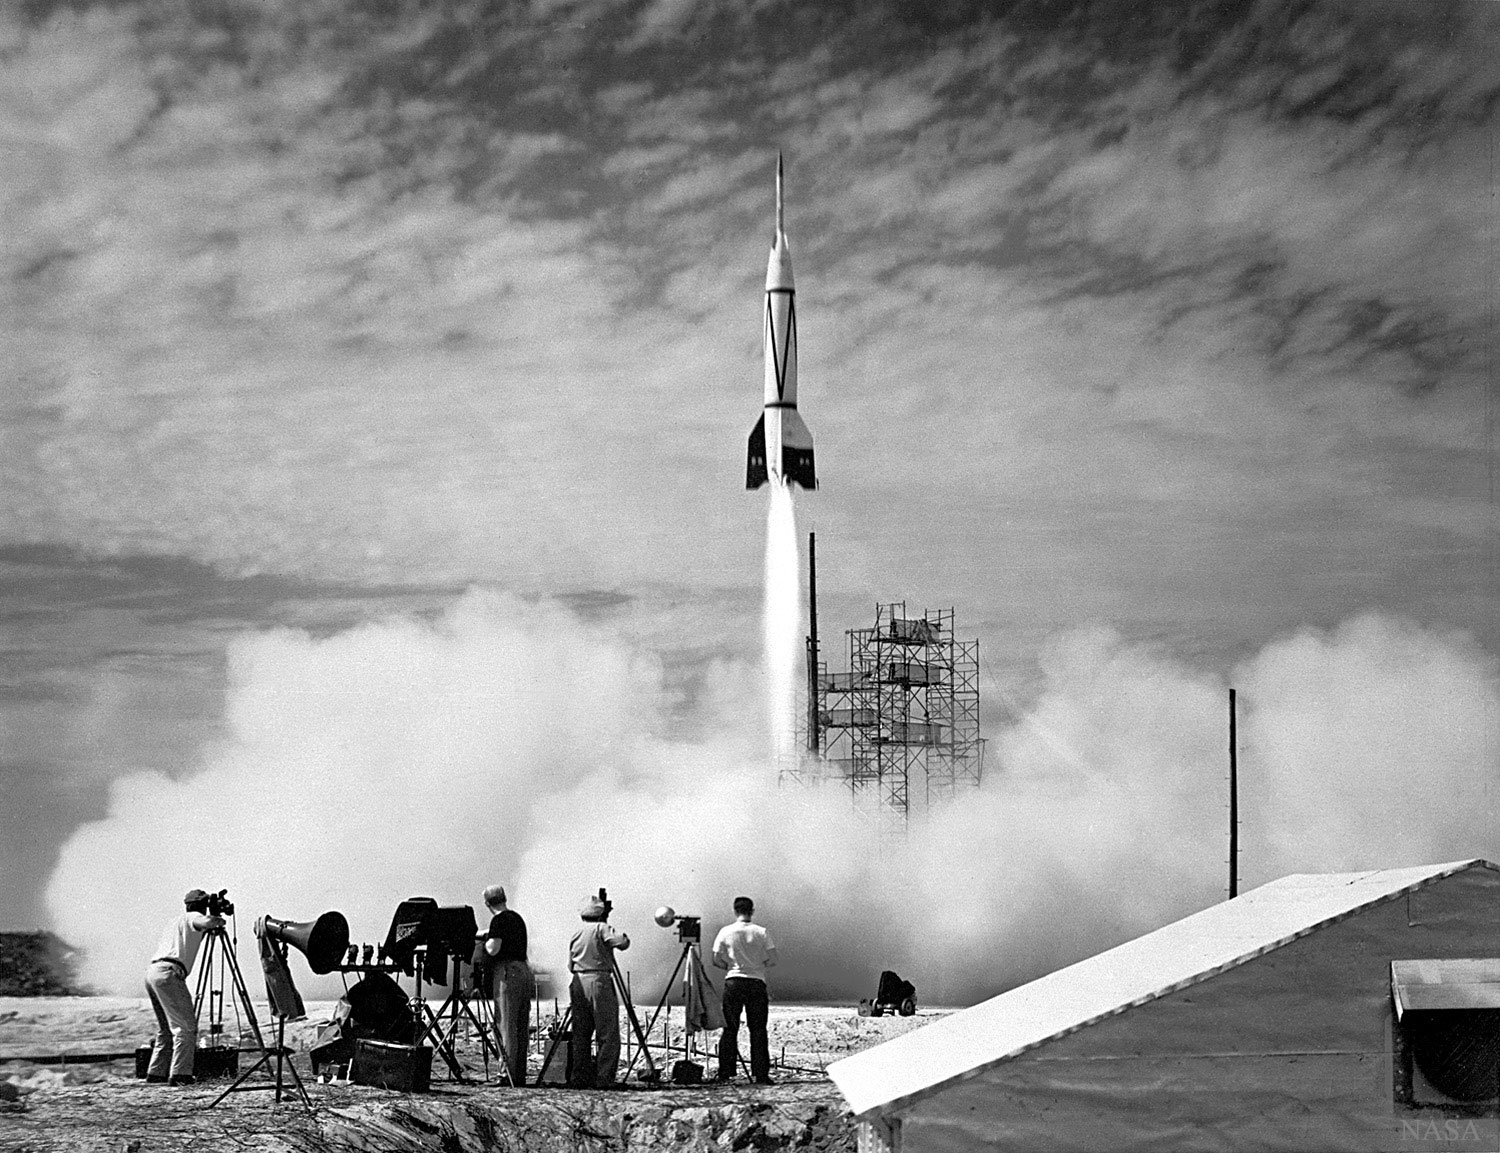 The First Rocket Launch from Cape Canaveral